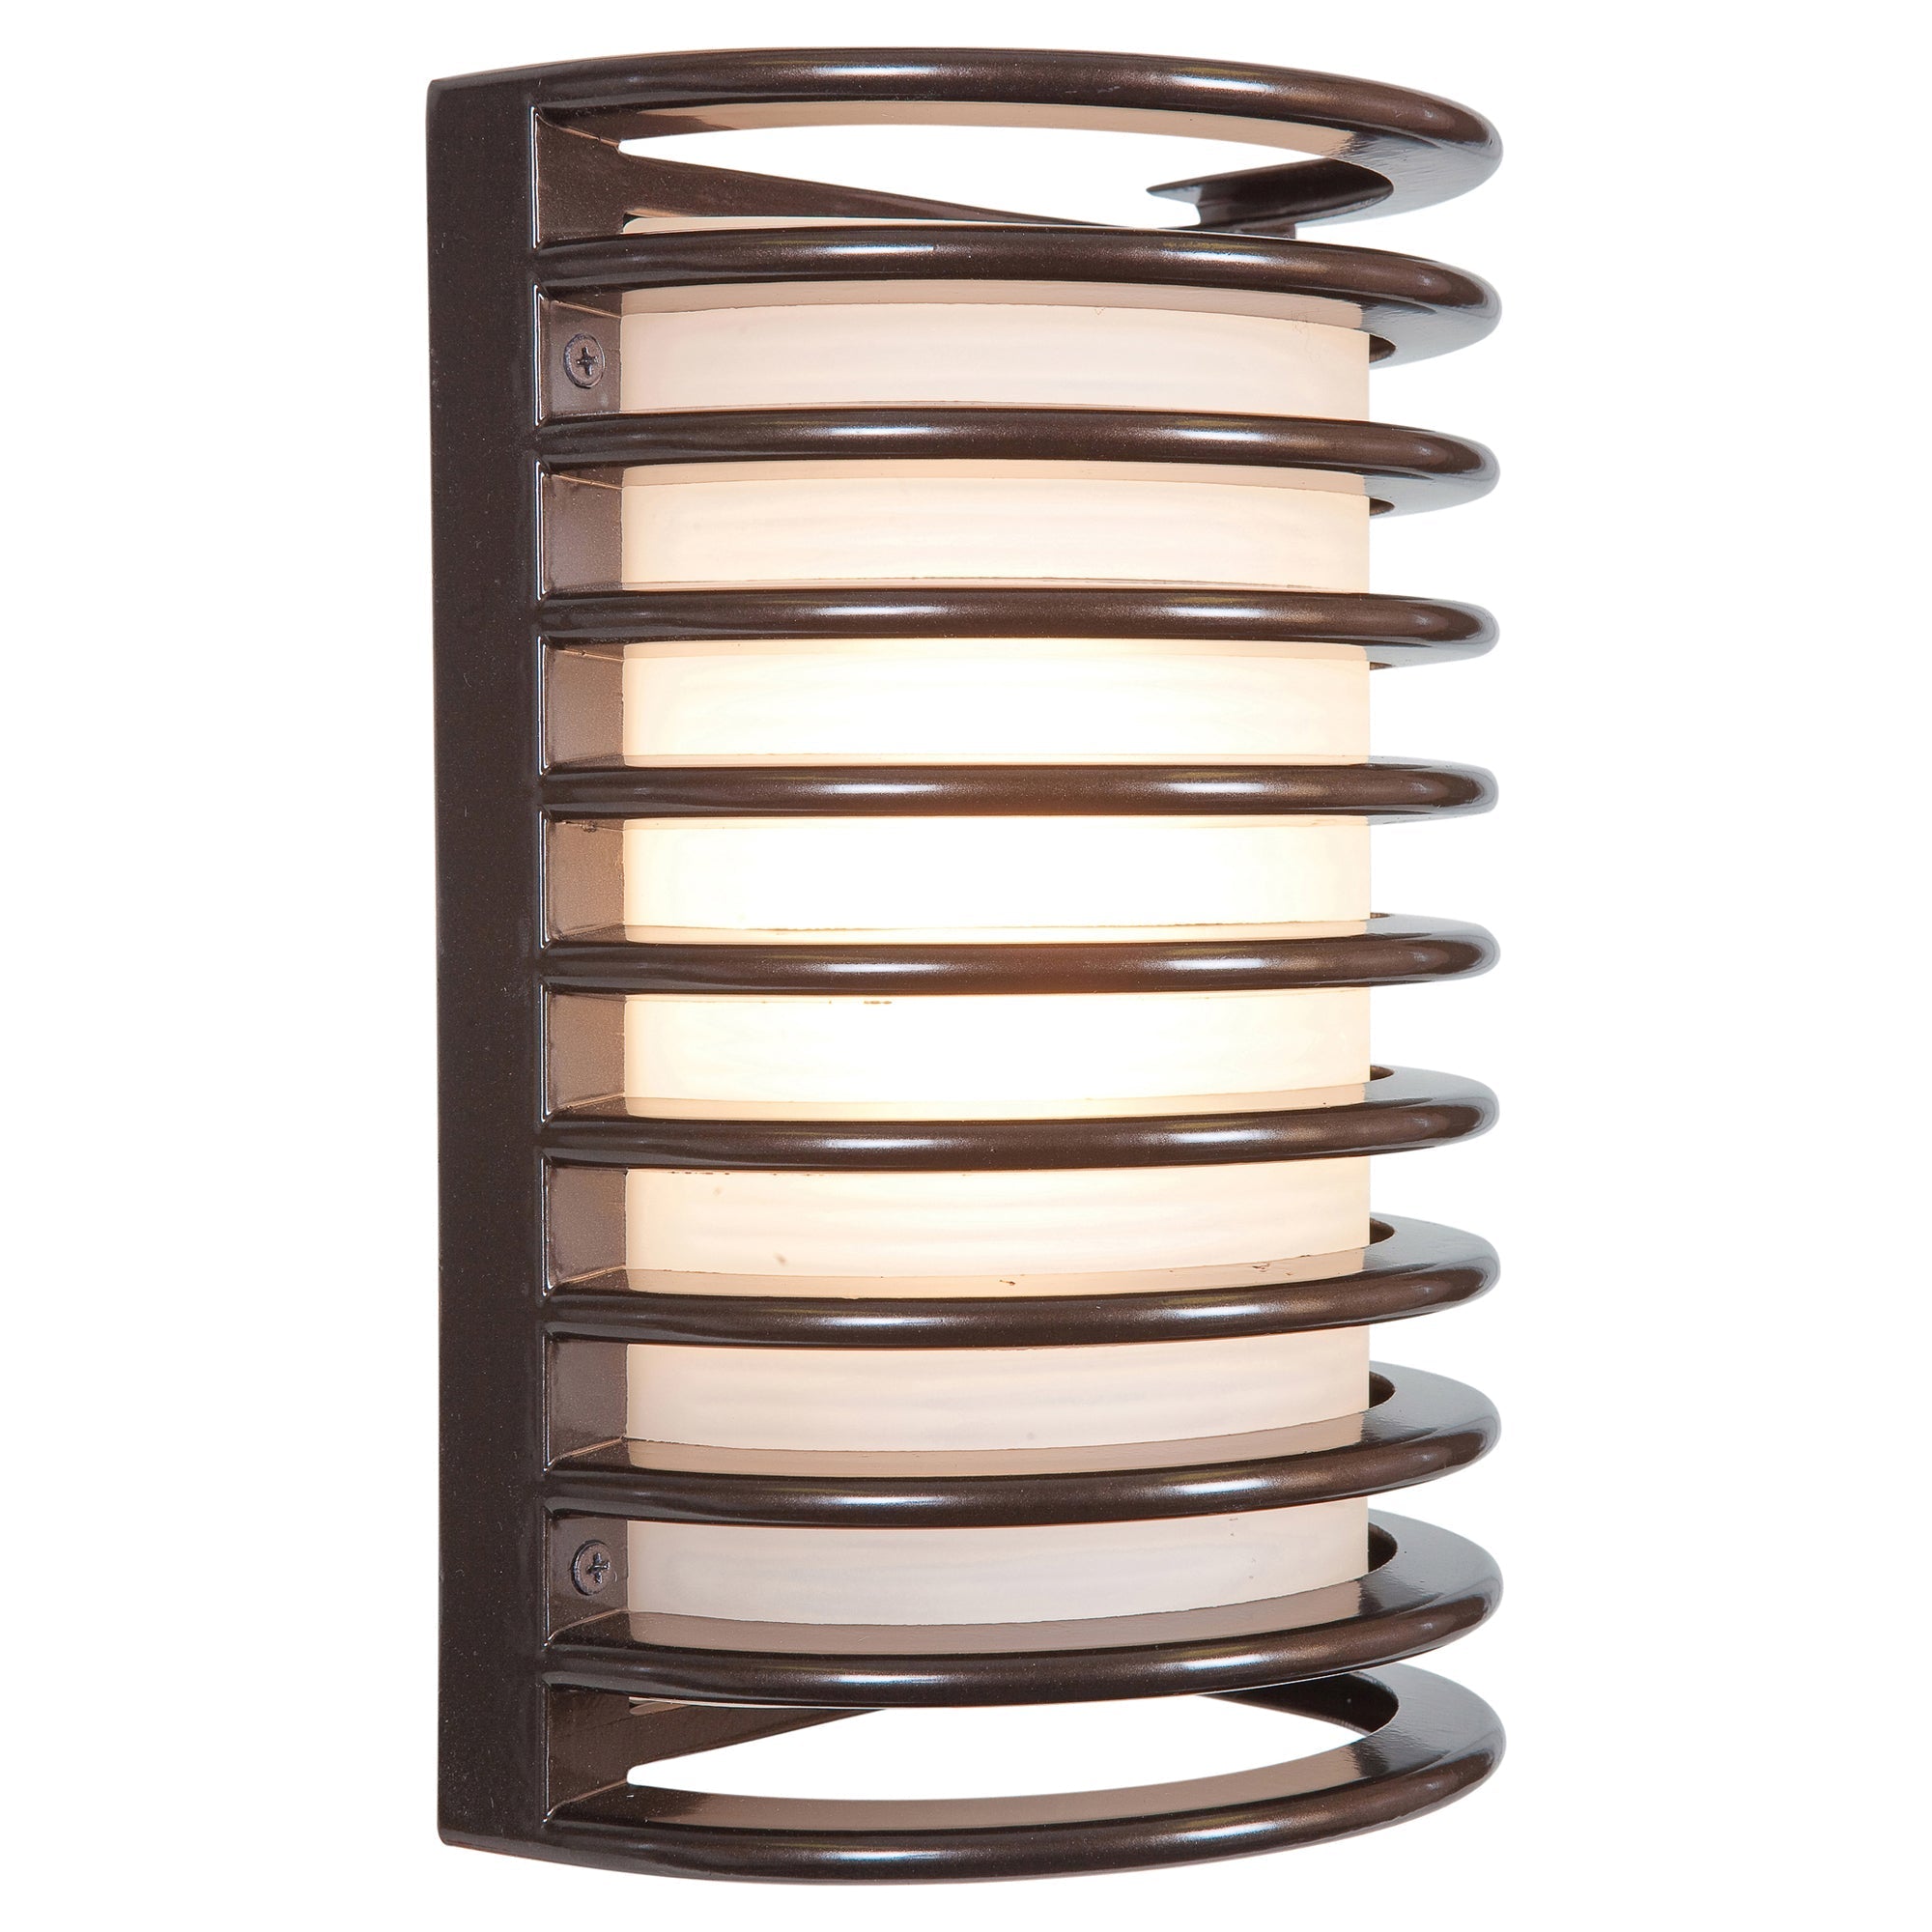 Phos Light Bermuda 10.5 in Outdoor LED 1-Light Wall Mount Sconce